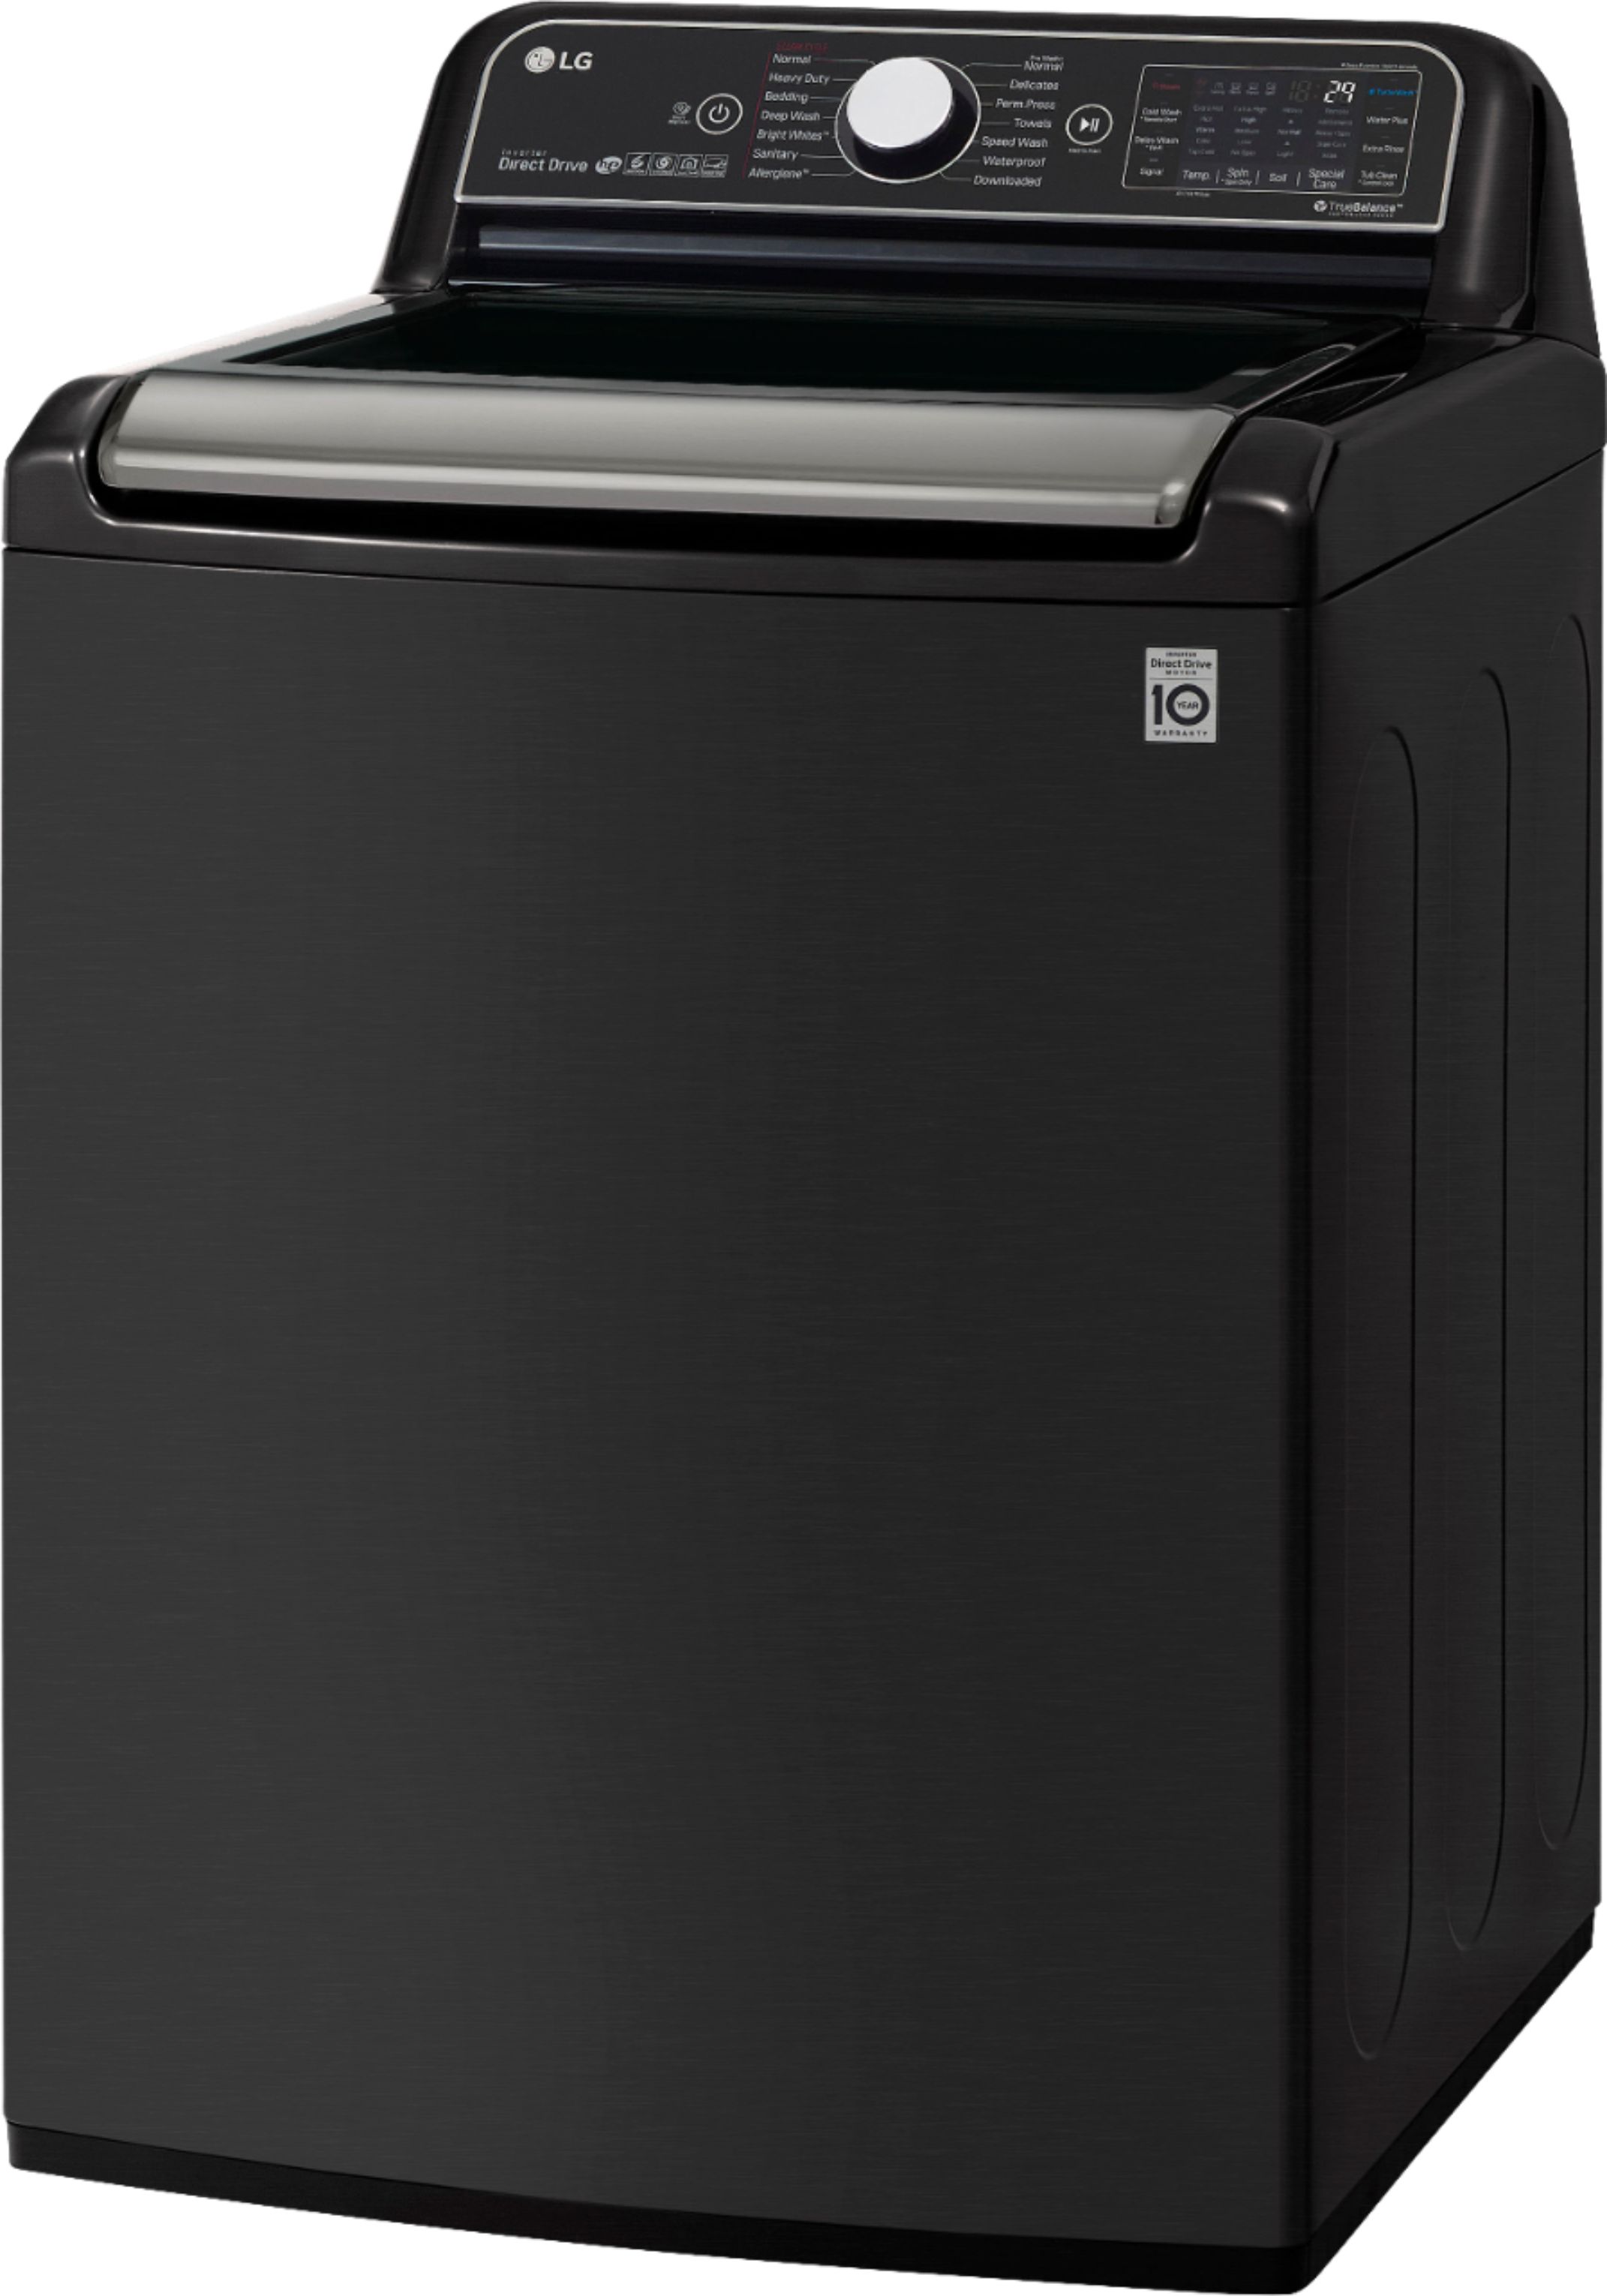 Left View: LG - 5.5 Cu. Ft. High-Efficiency Smart Top Load Washer with Steam and TurboWash3D Technology - Black Steel